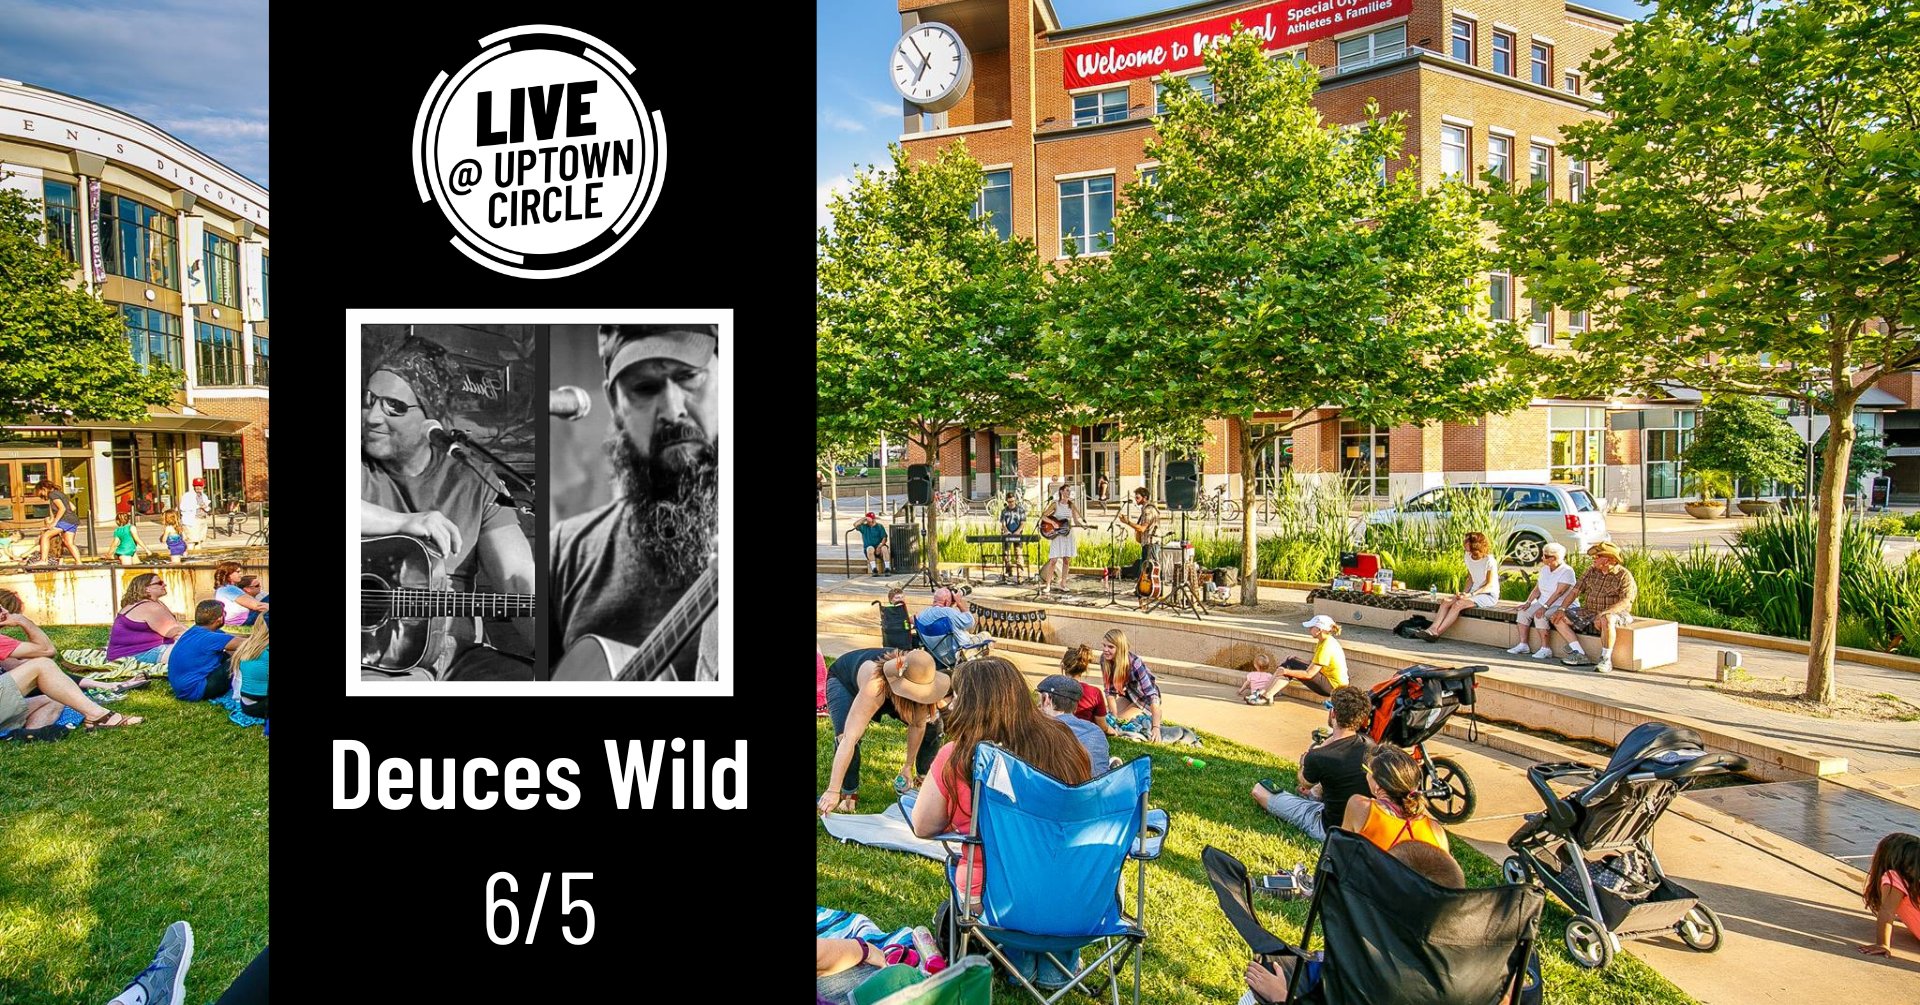 Normal LIVE presents Deuces Wild Acoustic Duo @ Uptown Circle